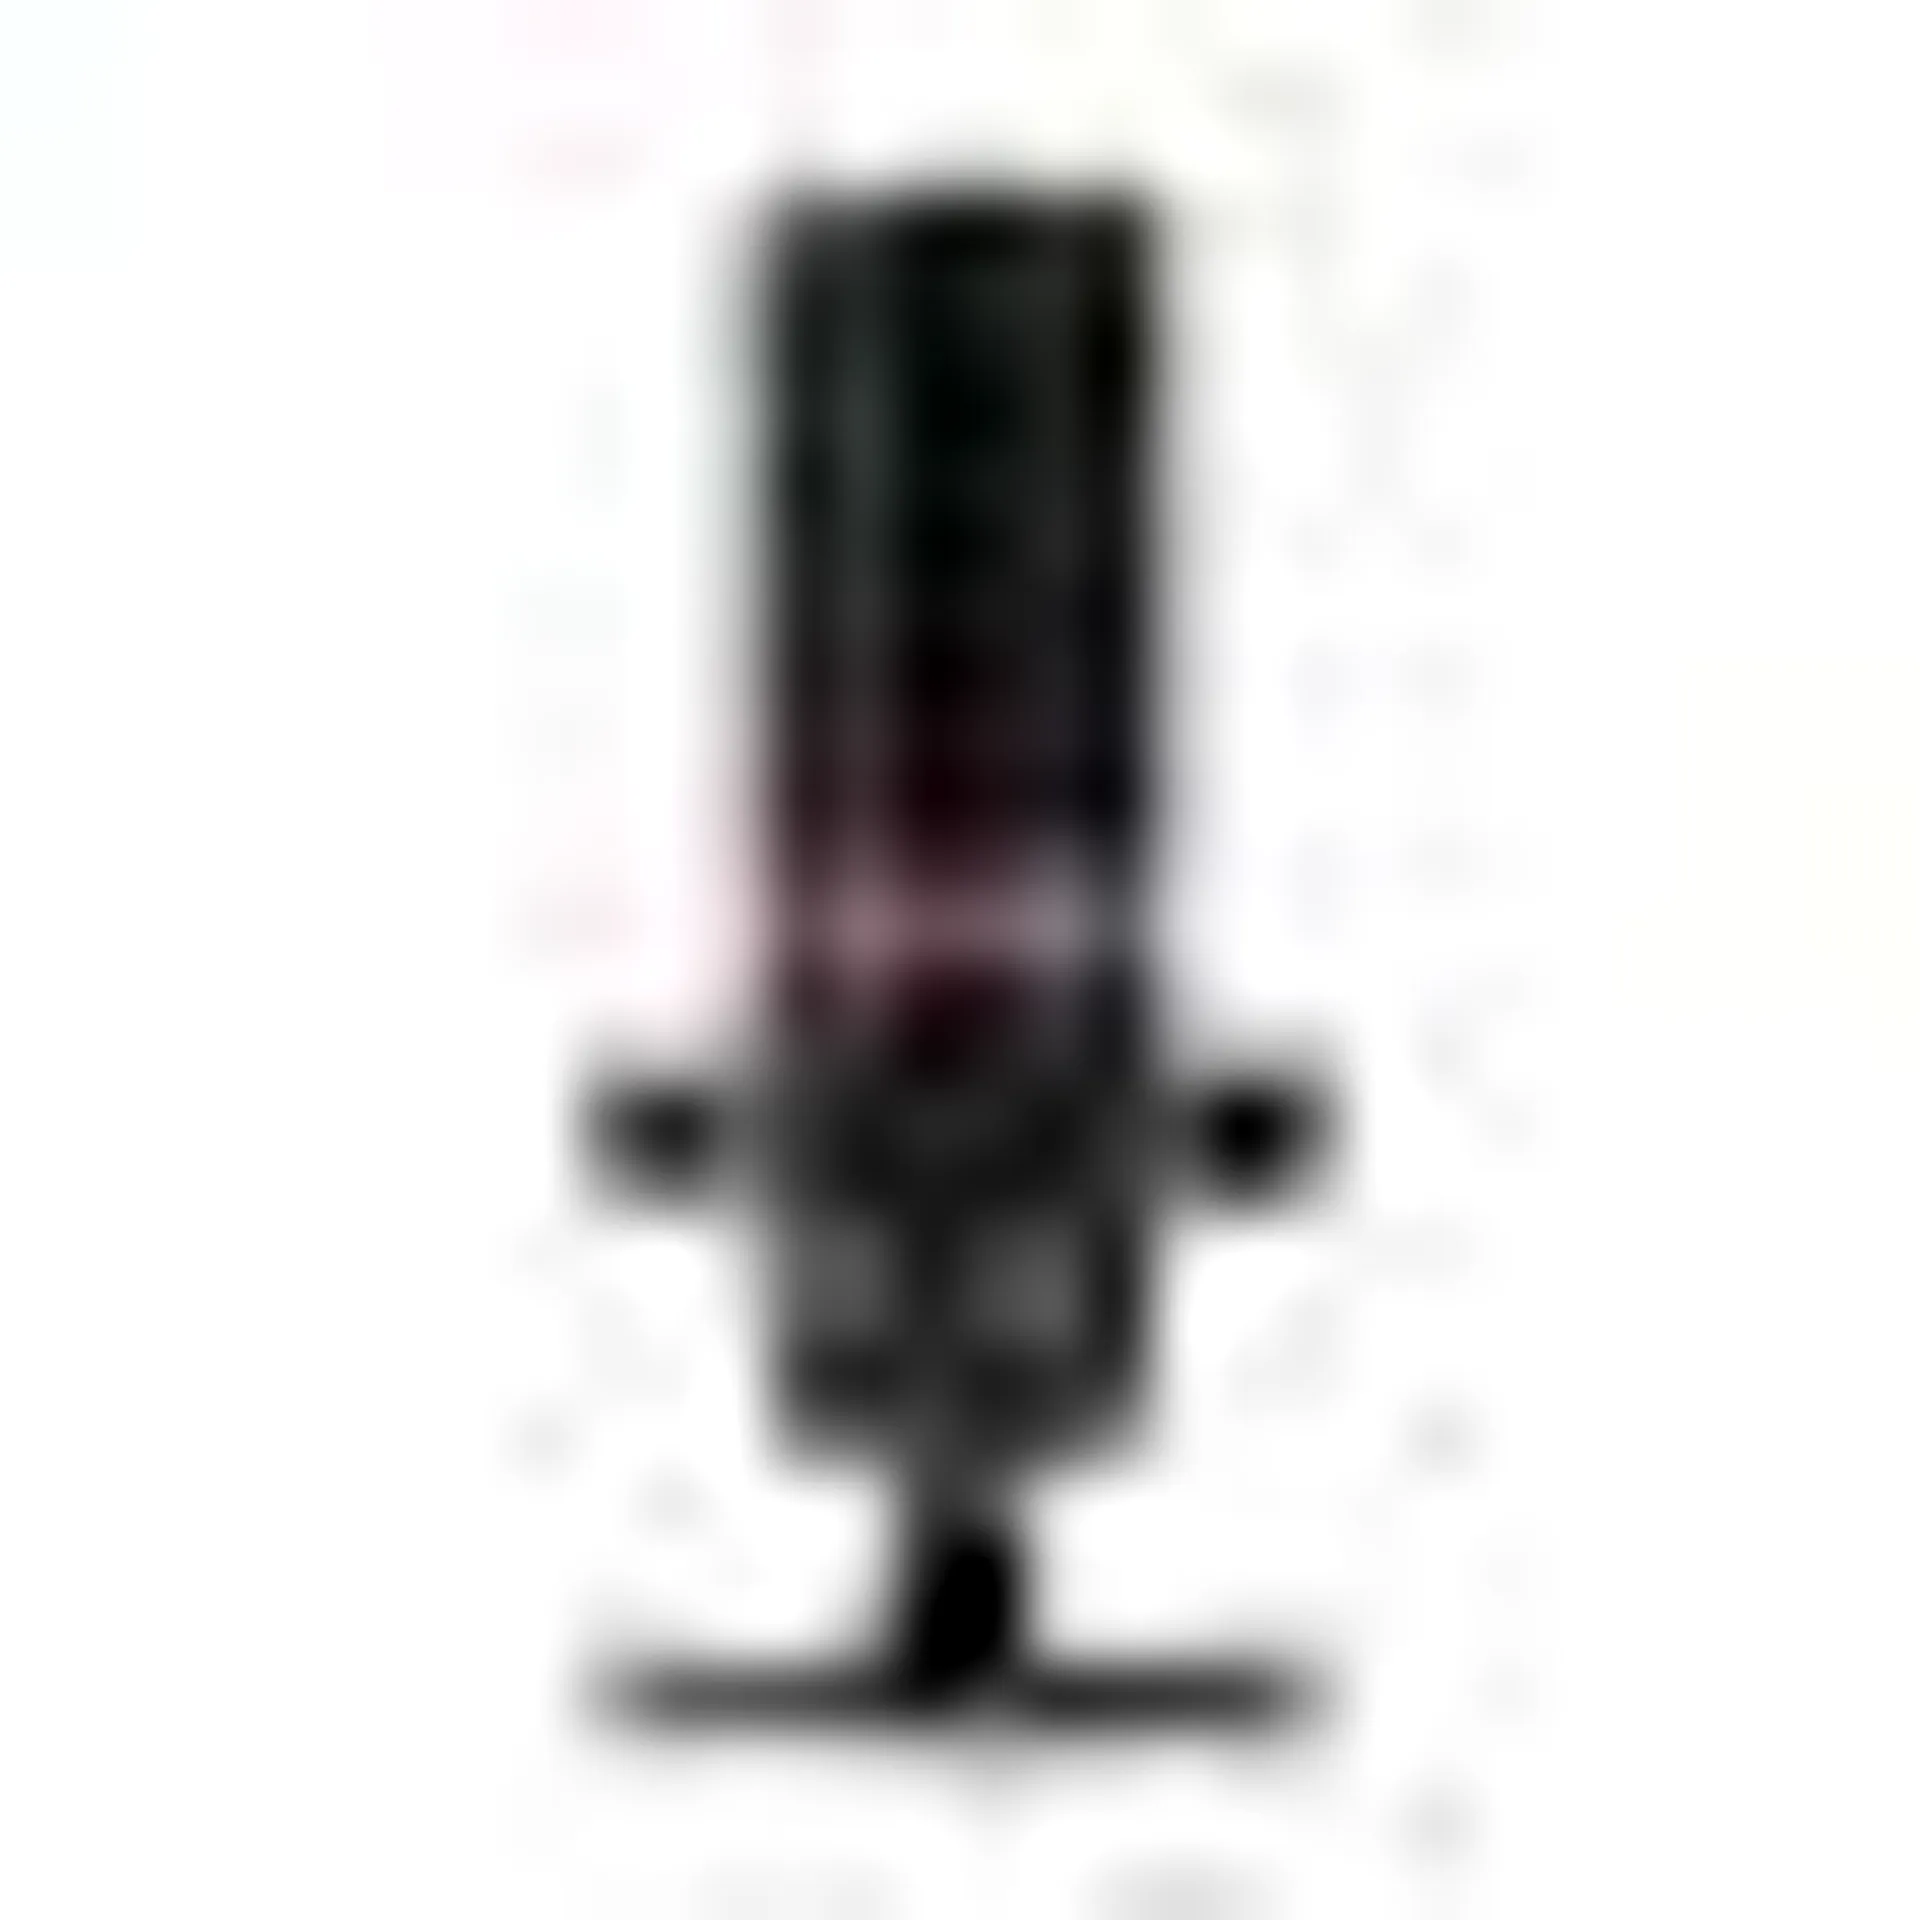 HyperX DuoCast - Gaming Microphone